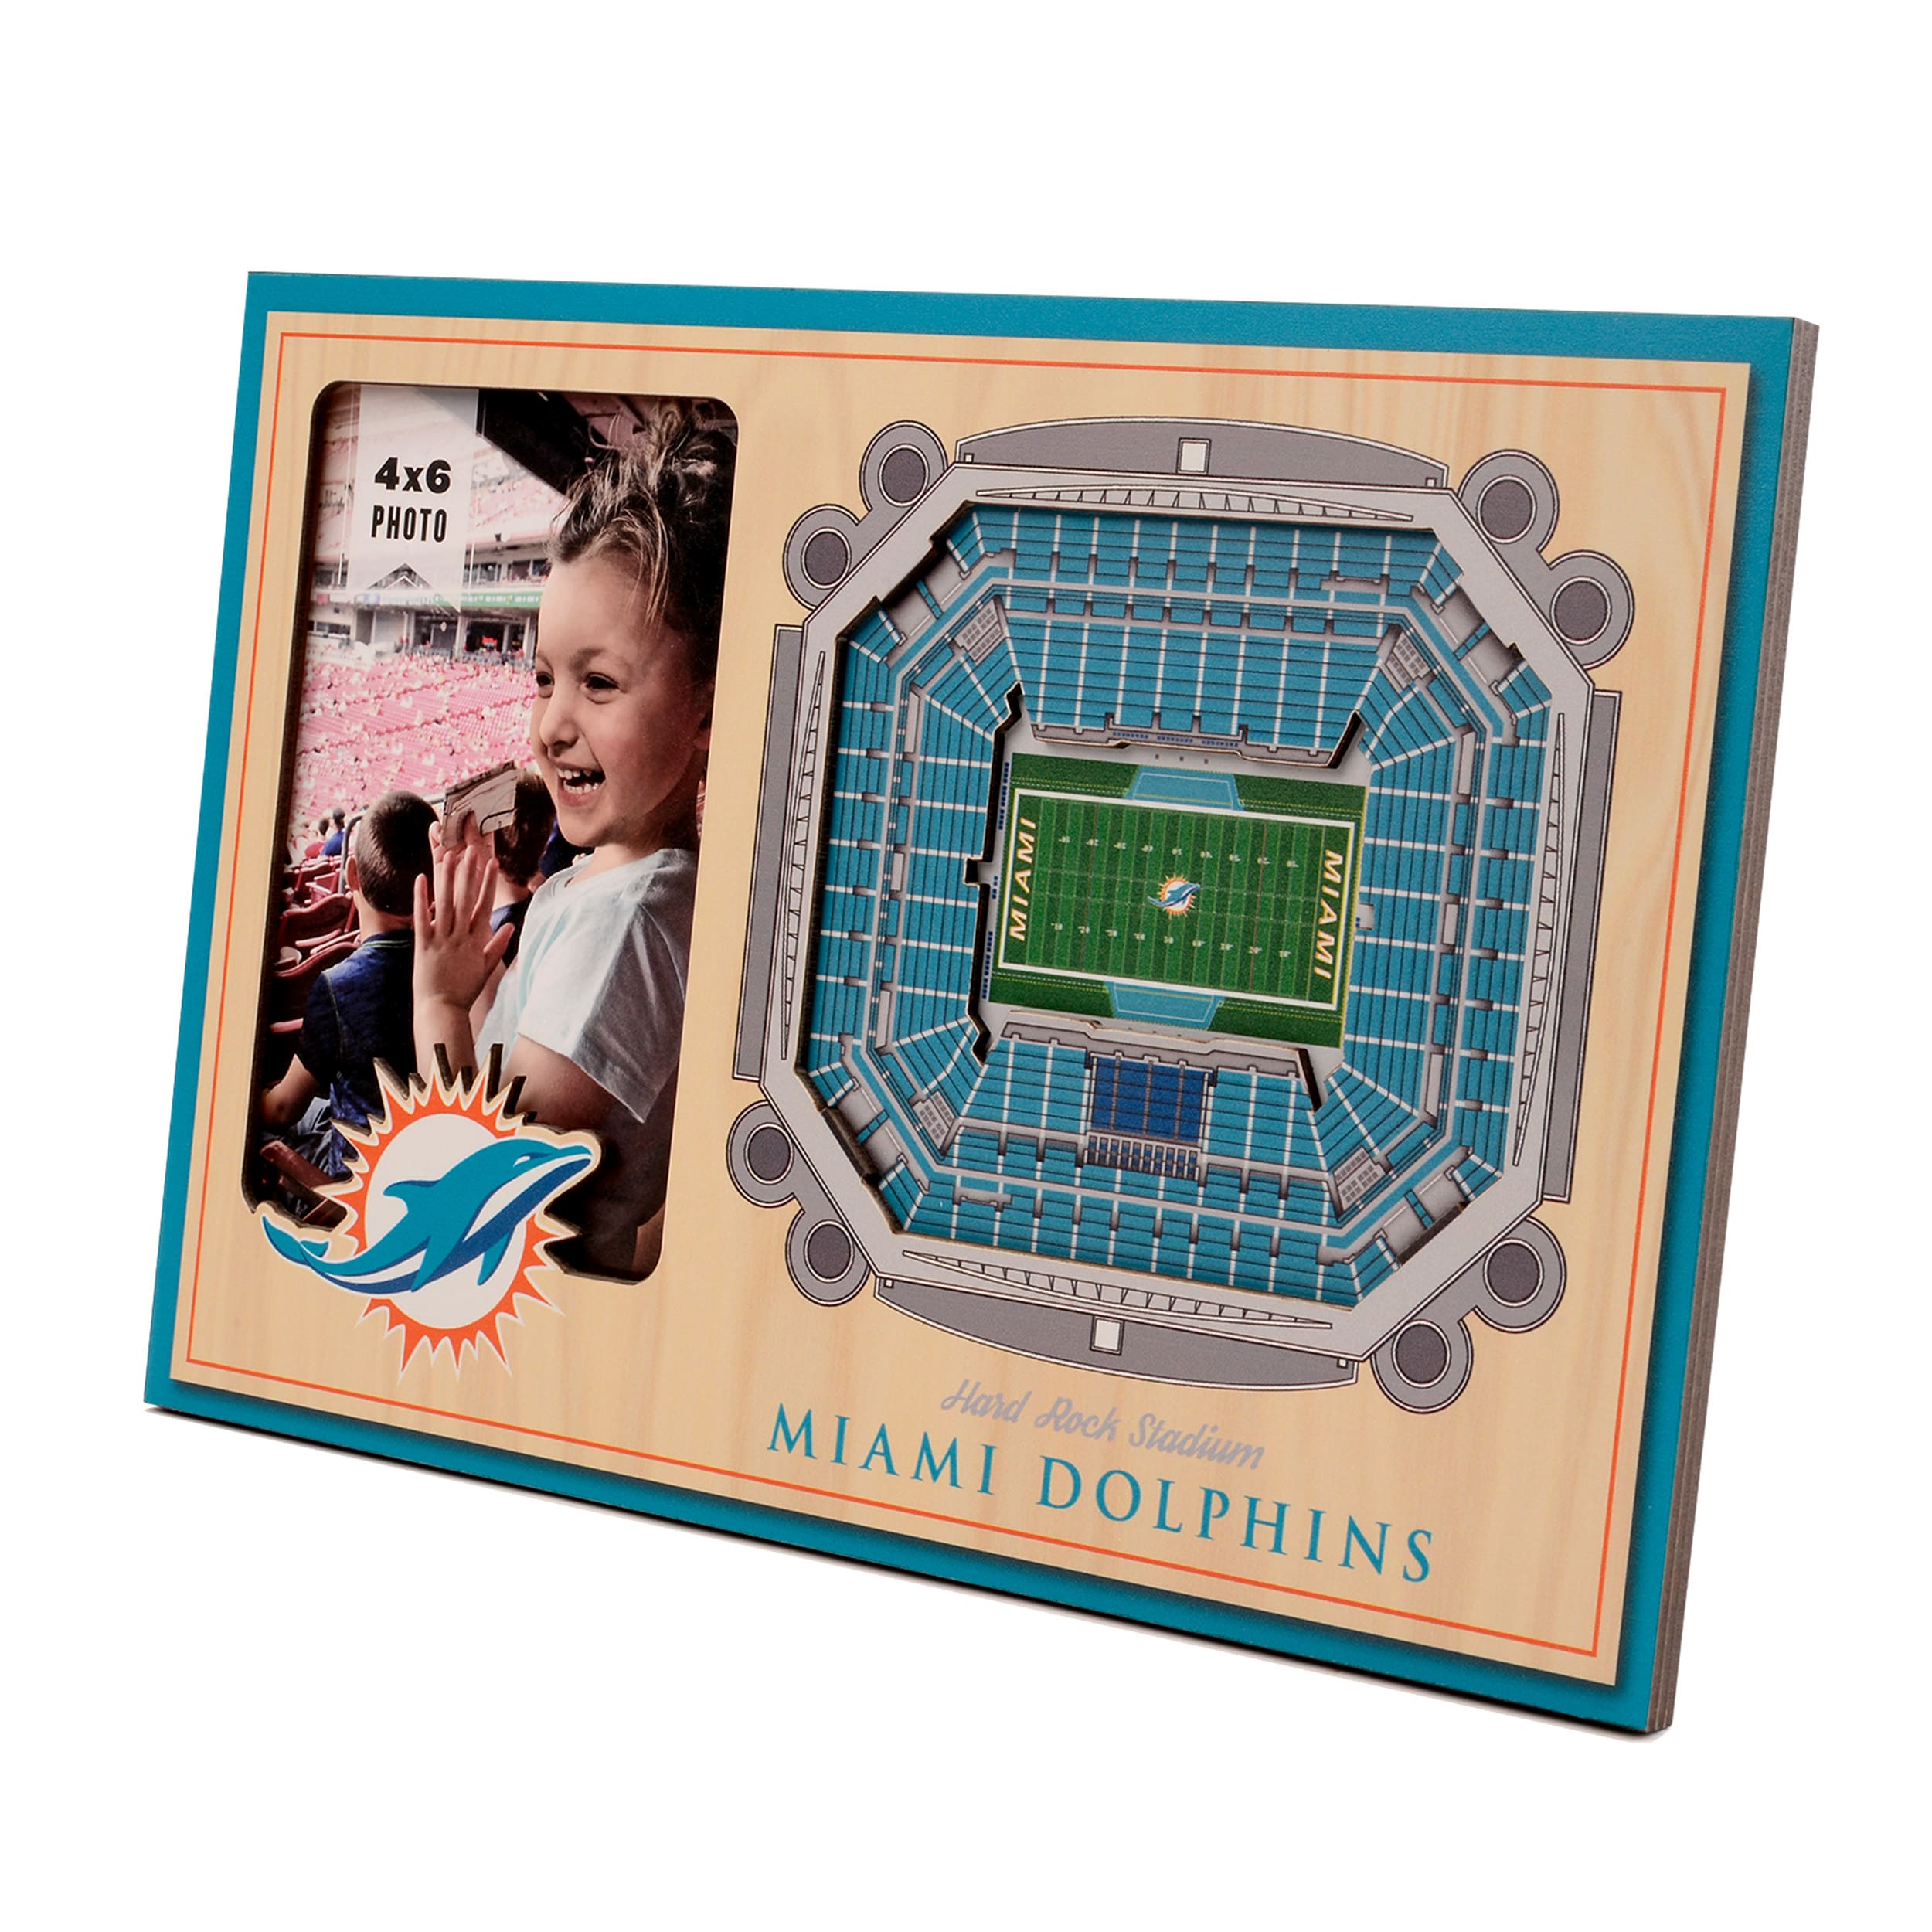 Come get some new Miami Dolphins swag! - Hard Rock Stadium